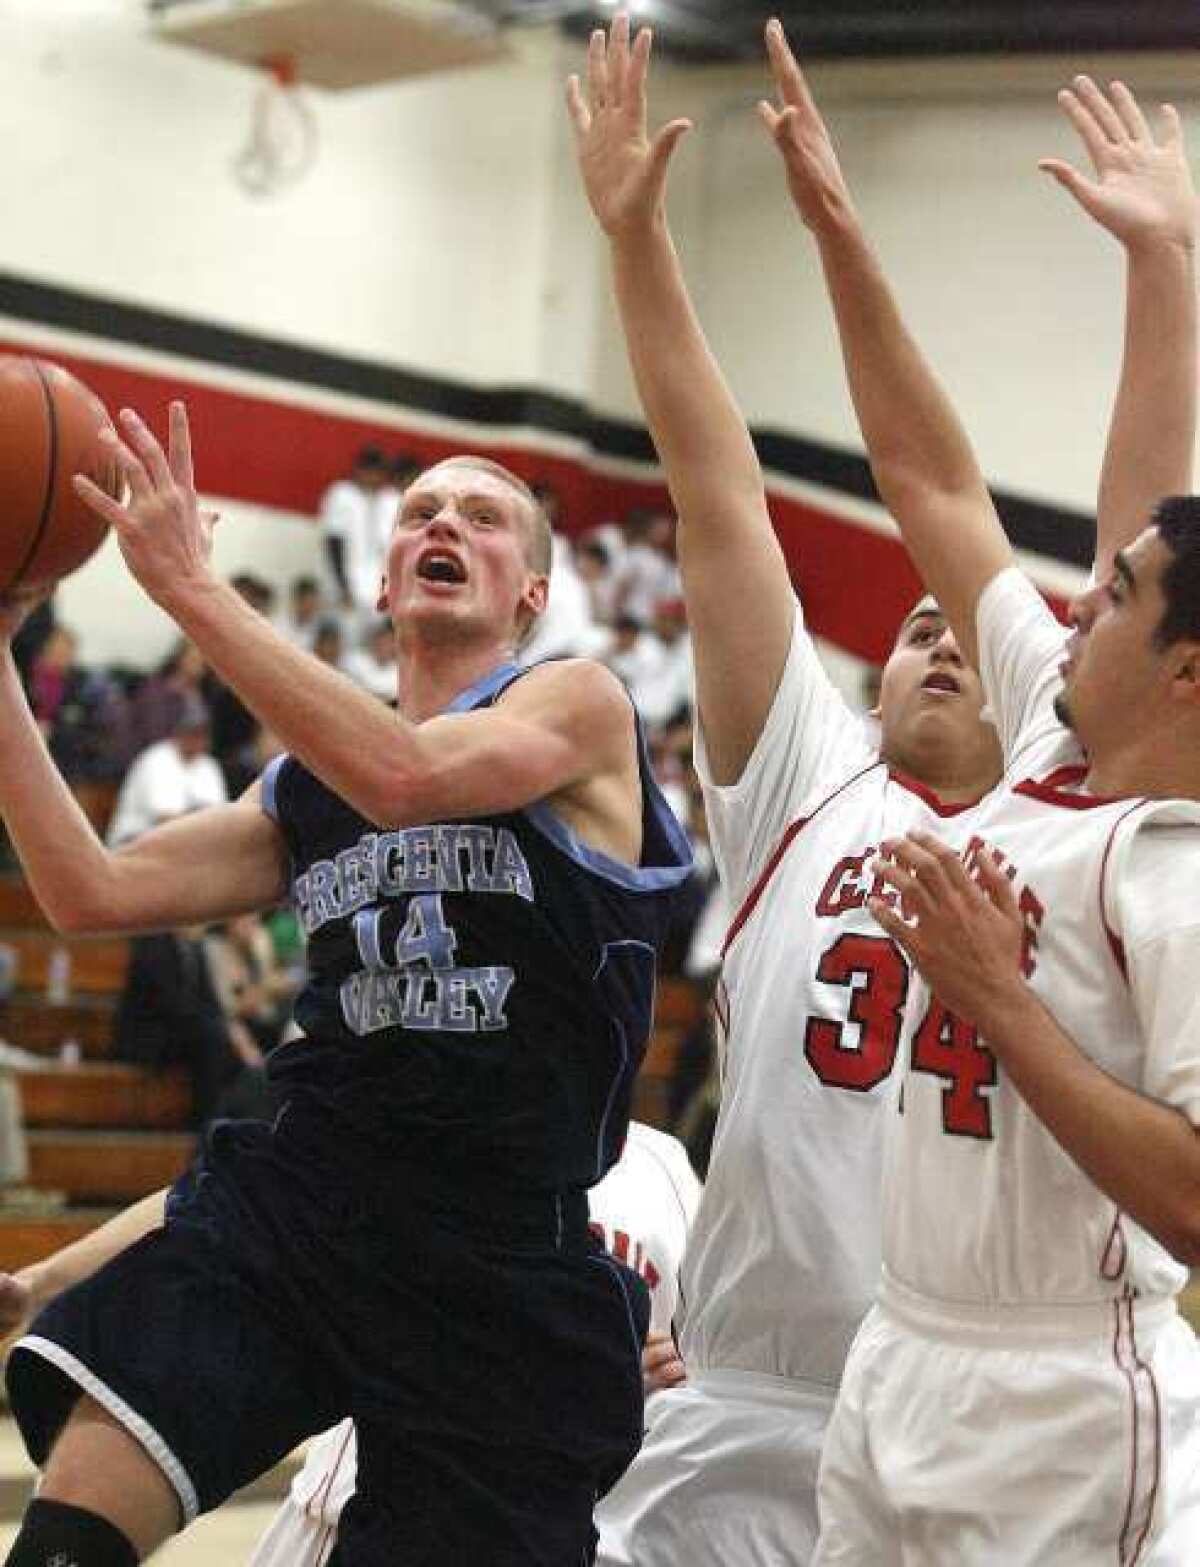 ARCHIVE PHOTO: Crescenta Valley's Cole Currie was named the co-league player of the year in the Pacific League.